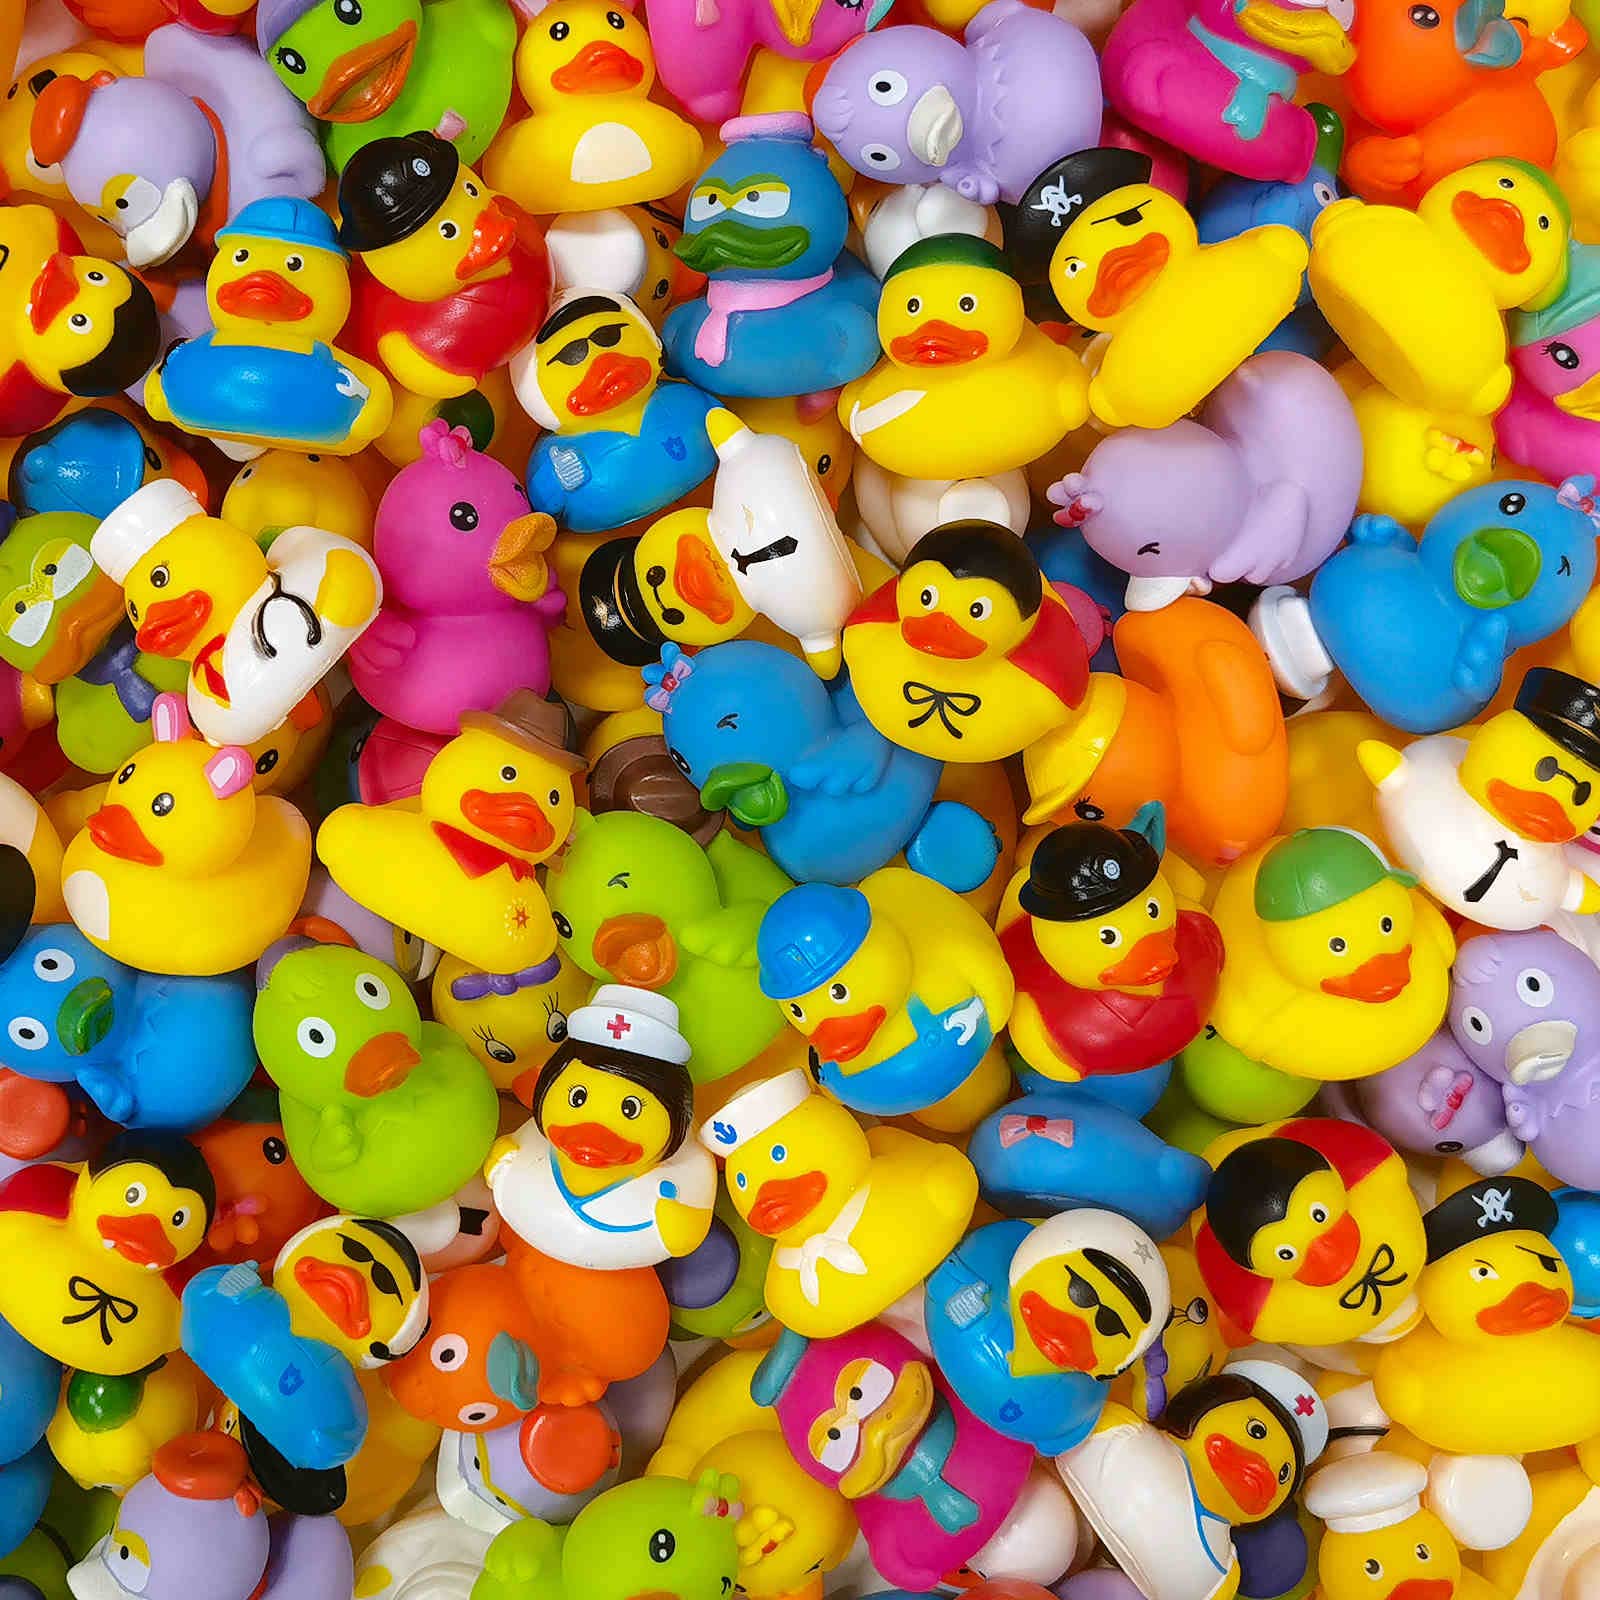 Arttyma Rubber Ducks in Bulk,Assortment Duckies for Jeep Ducking Floater Duck Bath Toys Party Favors (100-Pack)